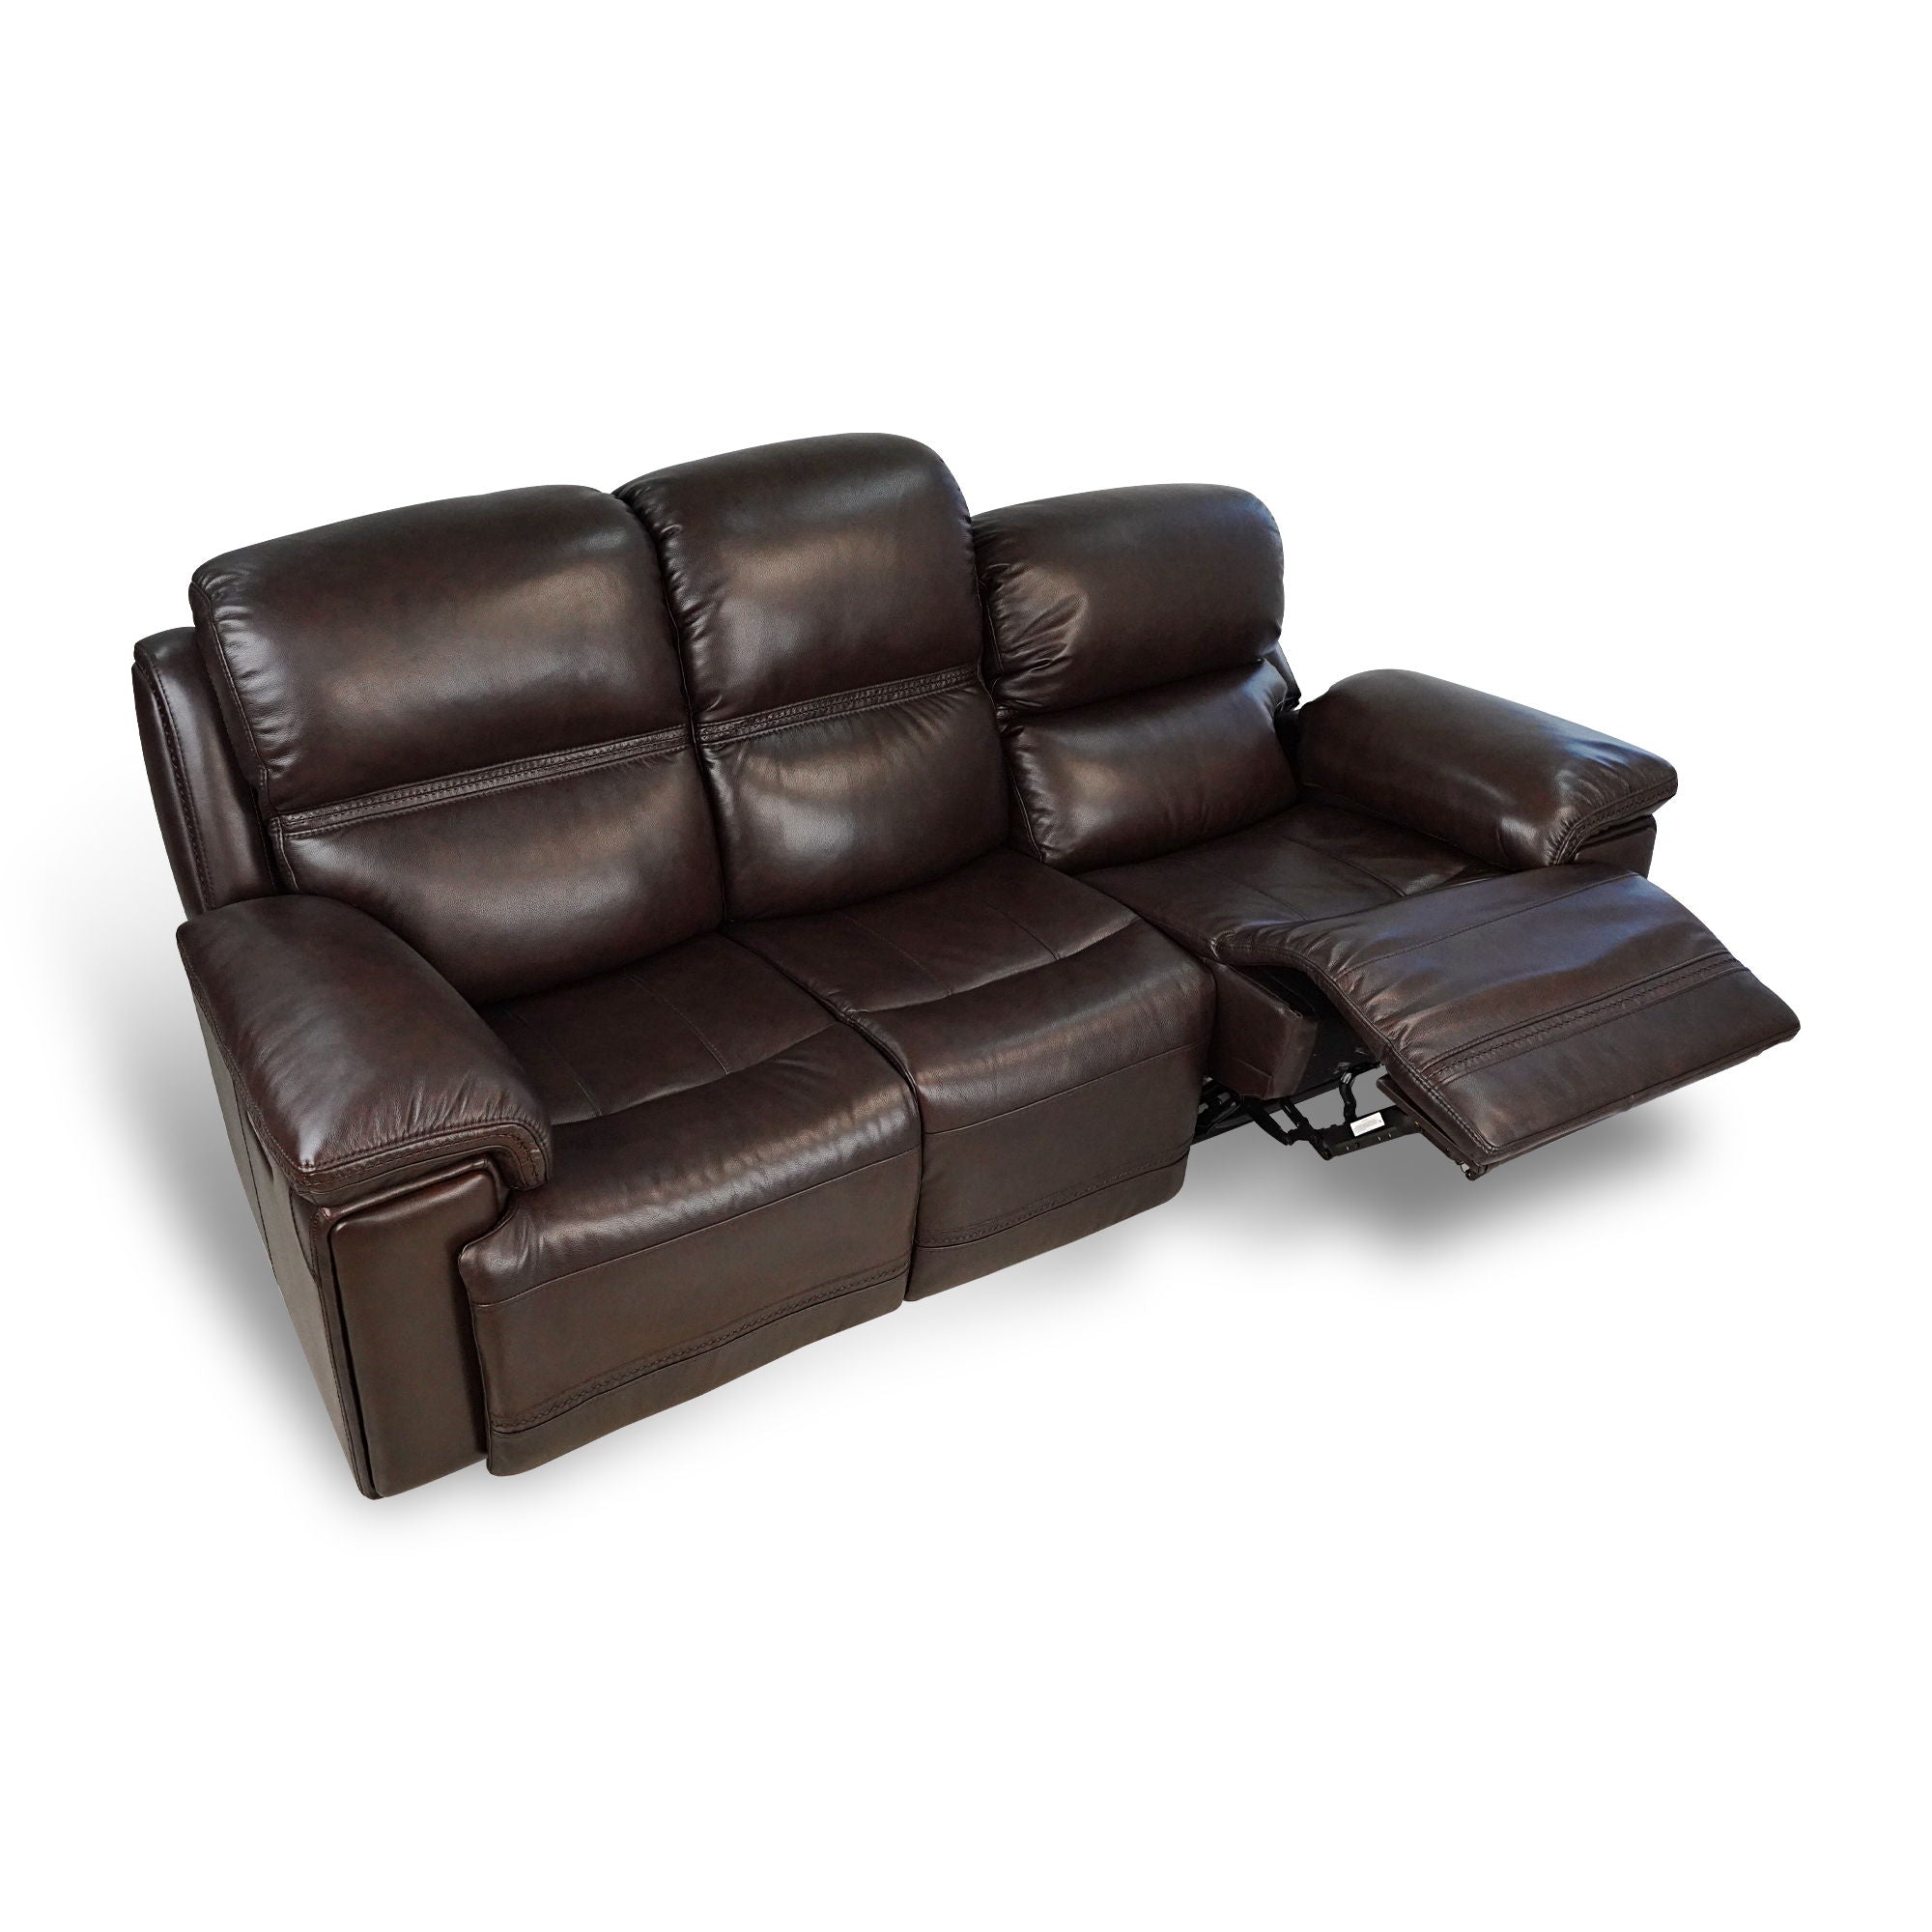 Timo Top Grain Leather Power Reclining Sofa, Adjustable Headrest, Cross Stitching